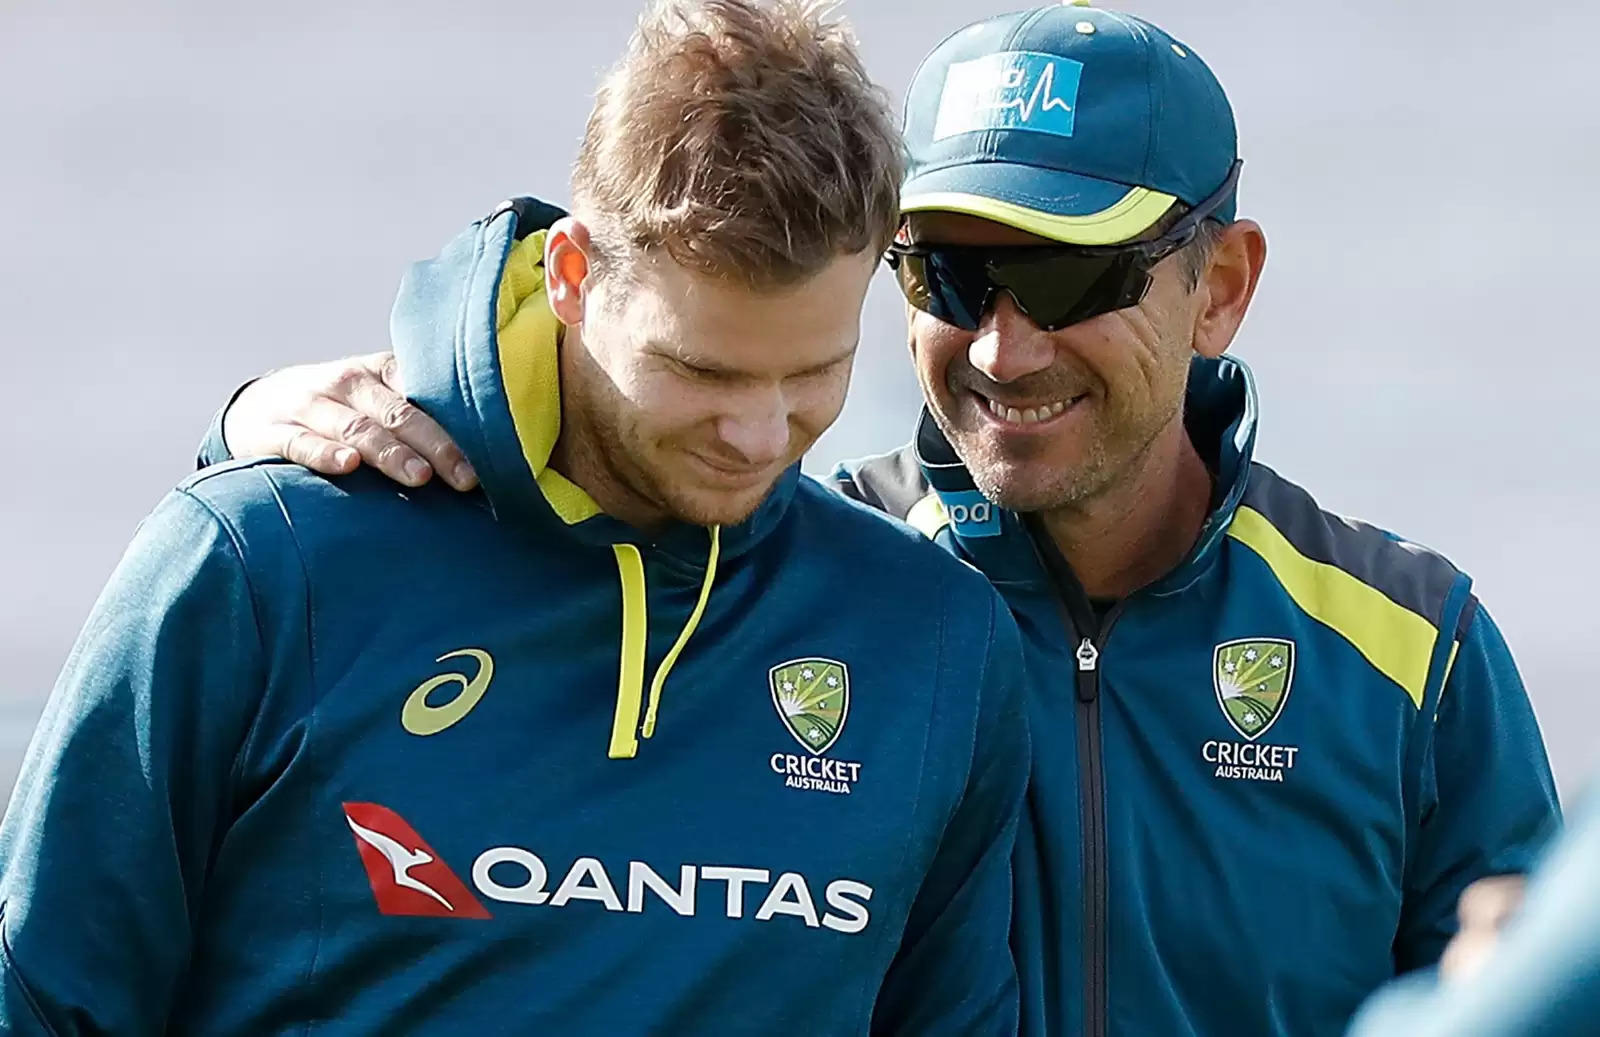 Justin Langer’s “intense reactions” after 2-1 loss to India under scanner : Reports